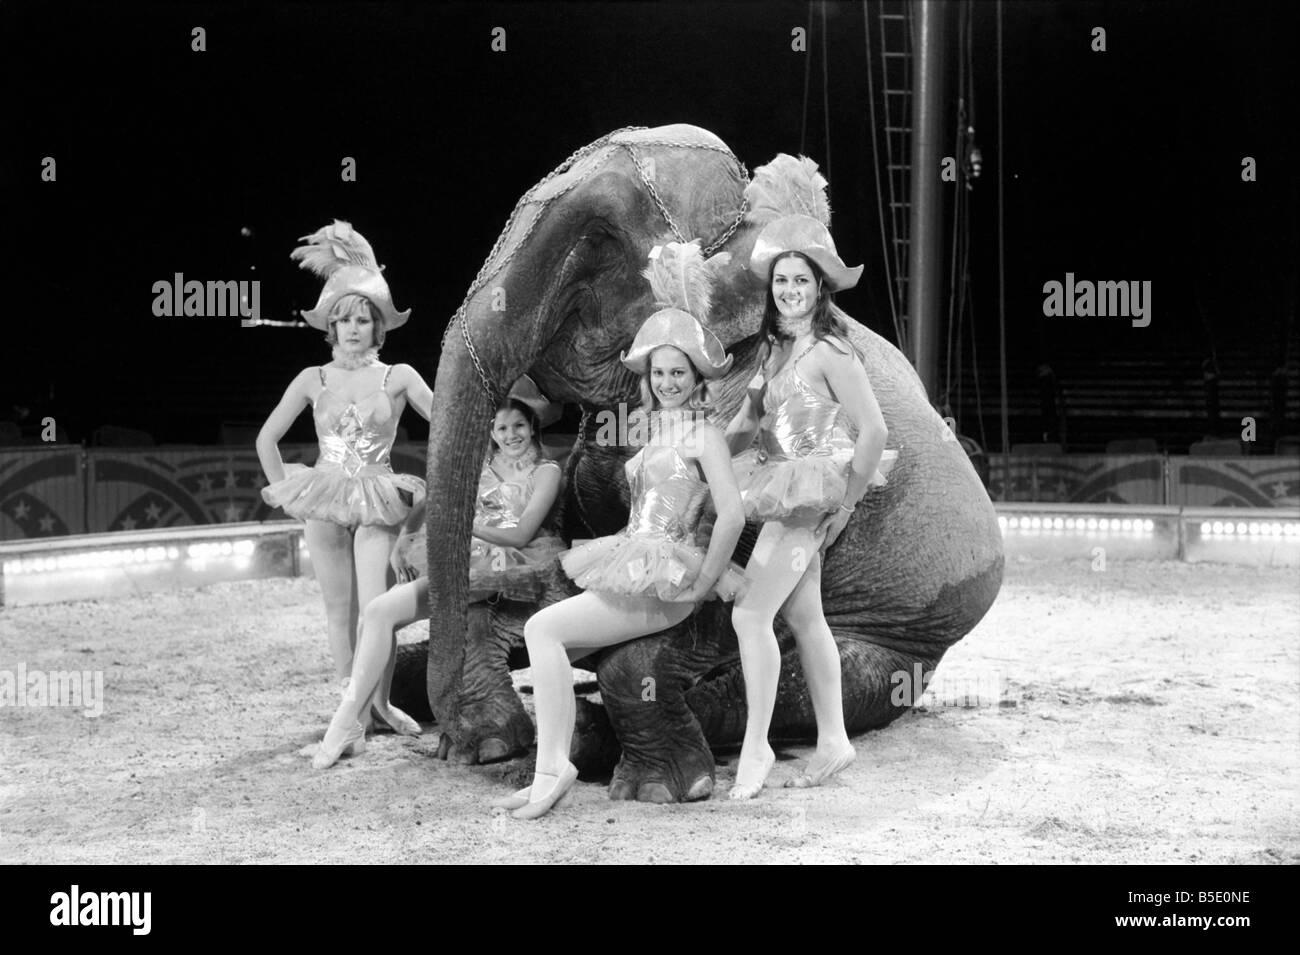 Travel by Jumbo is the motto of the four Smart Sisters who are busy training for the Christmas Day Circus show which is being produced by their father David Smart at the Circus Winter quarters in Winkfield Berkshire. The four girls are Gabriella, aged 13 (smallest with long dark hair), Davida, aged 14 (long blonde hair), Rebecca aged 20 (short blonde hair with fringe) and Yasmin, aged 21, (tallest girl with long dark hair). This will be first time that the girls have appeared together and also the first appearance of the four young Elephants whose age are from 8-14 years Stock Photo